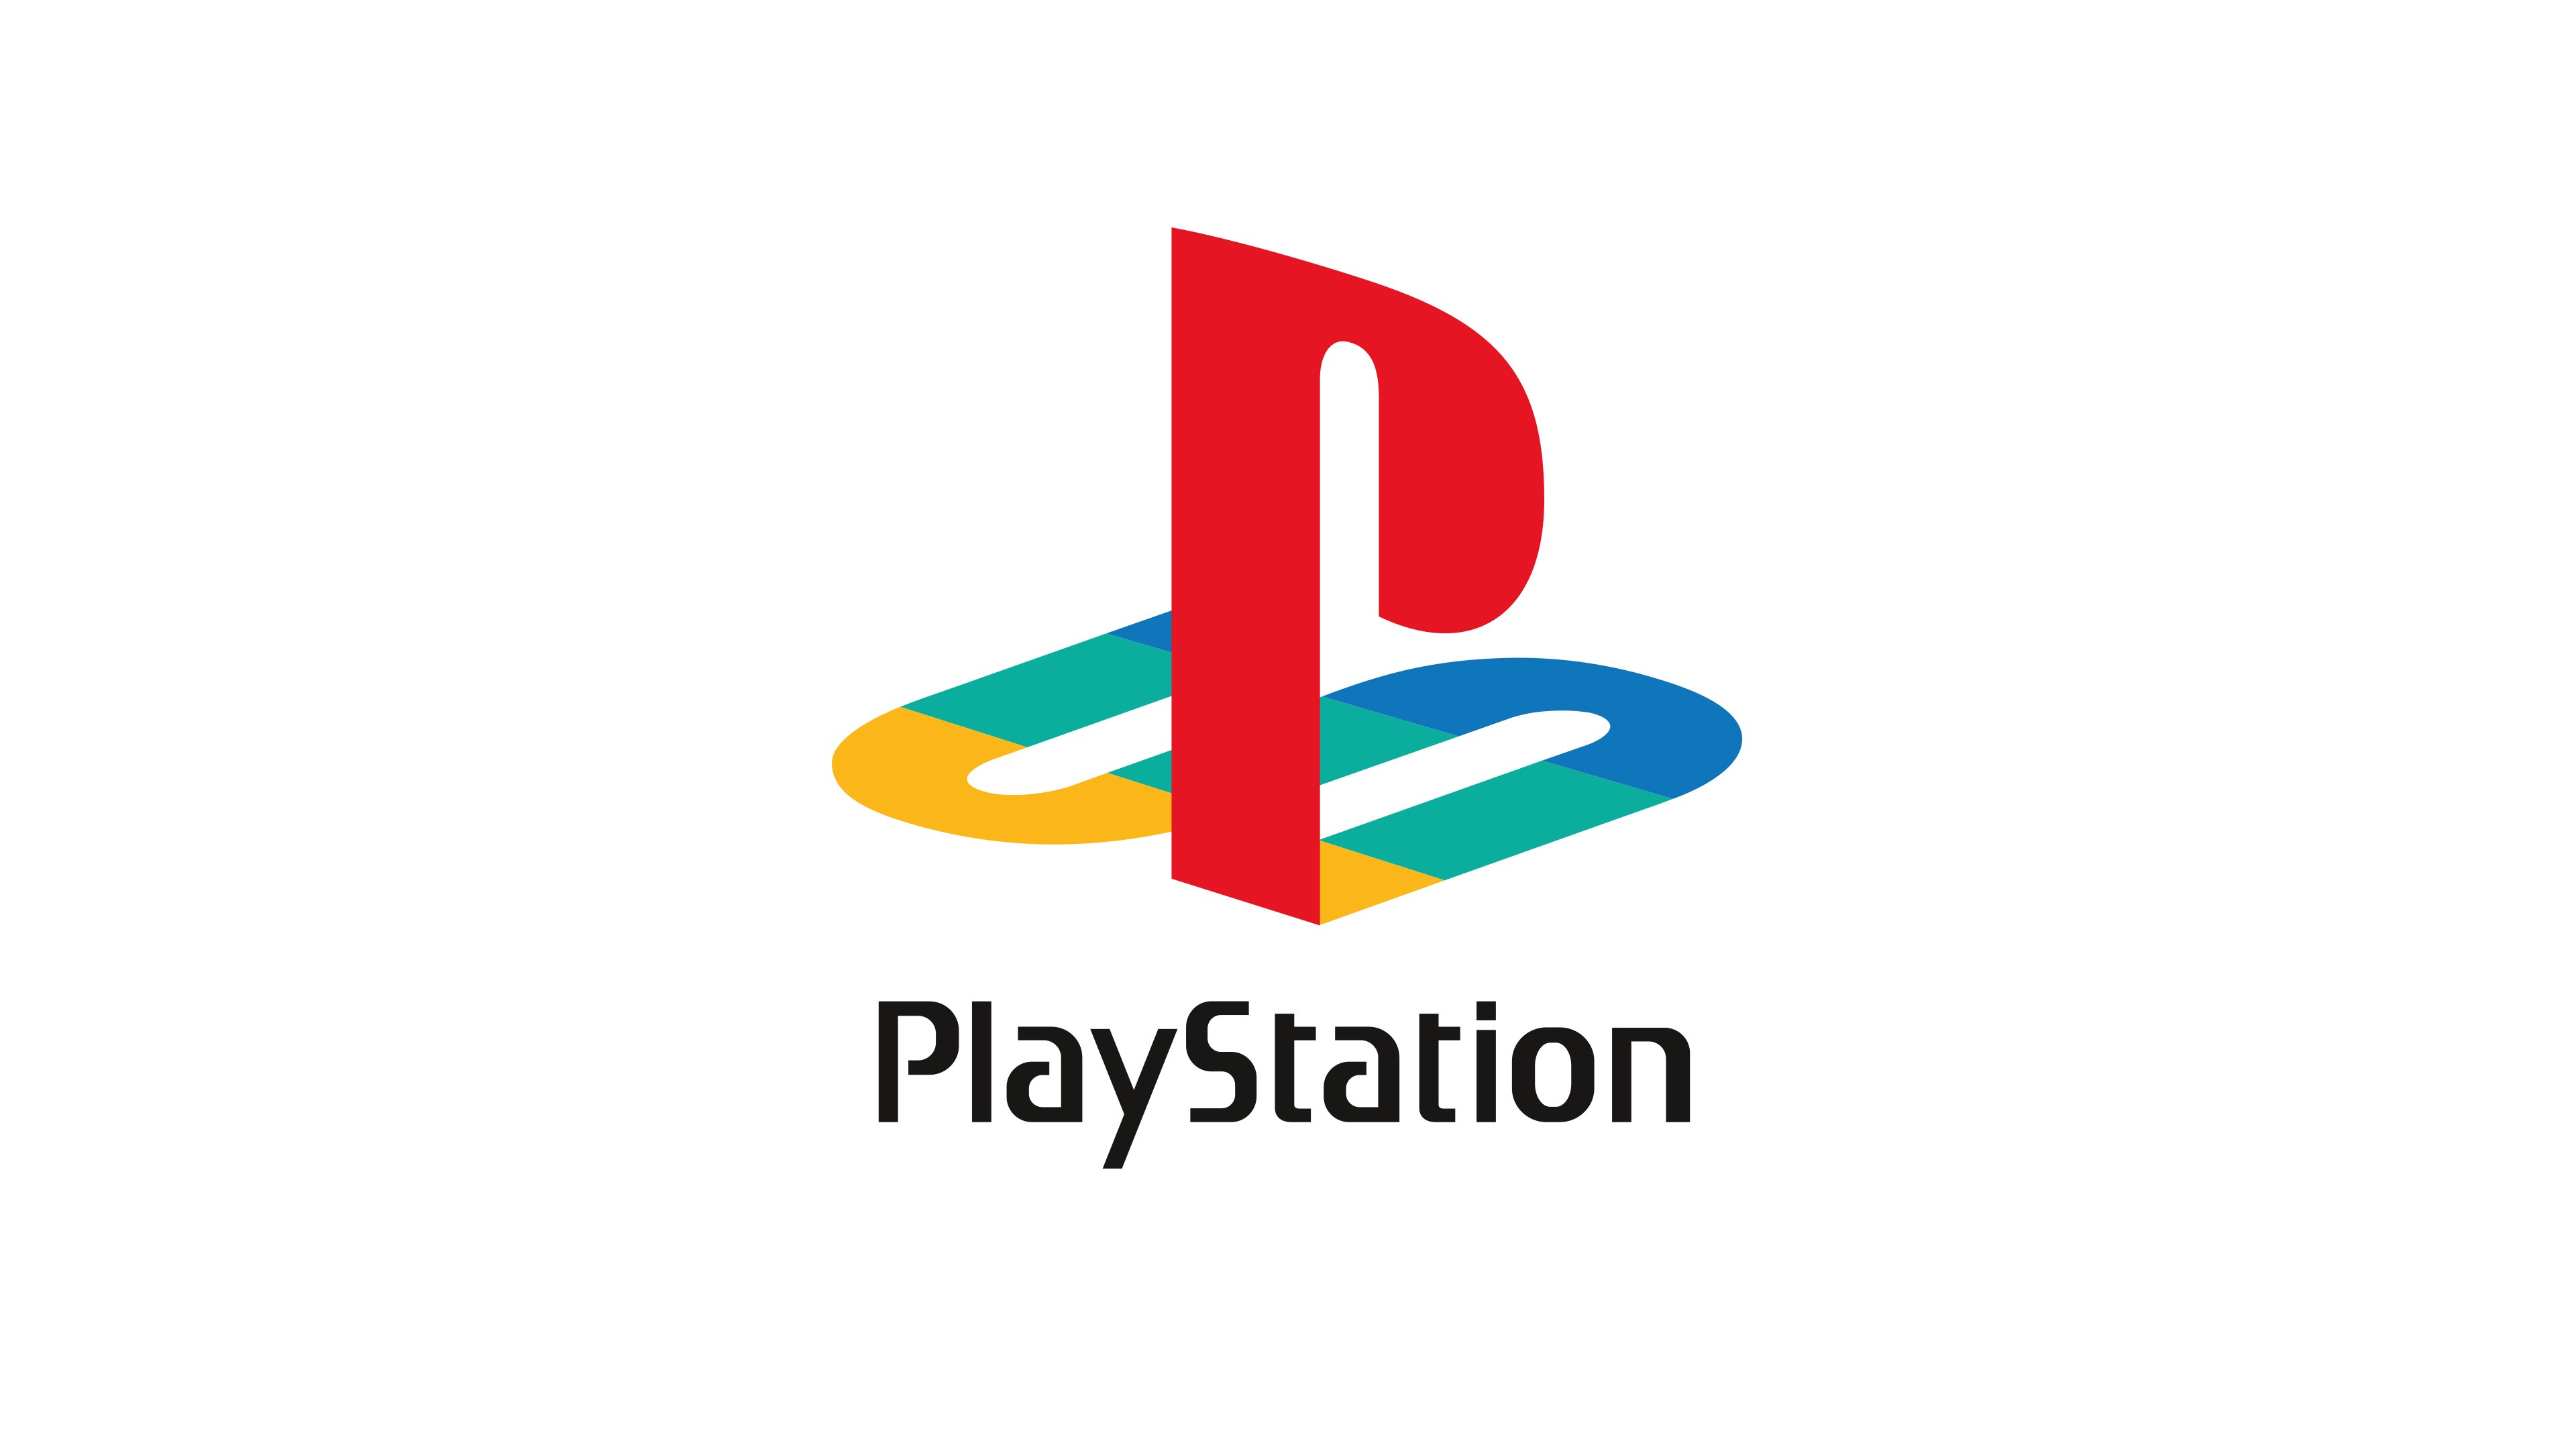 General 3840x2160 logo PlayStation video games white background minimalism text